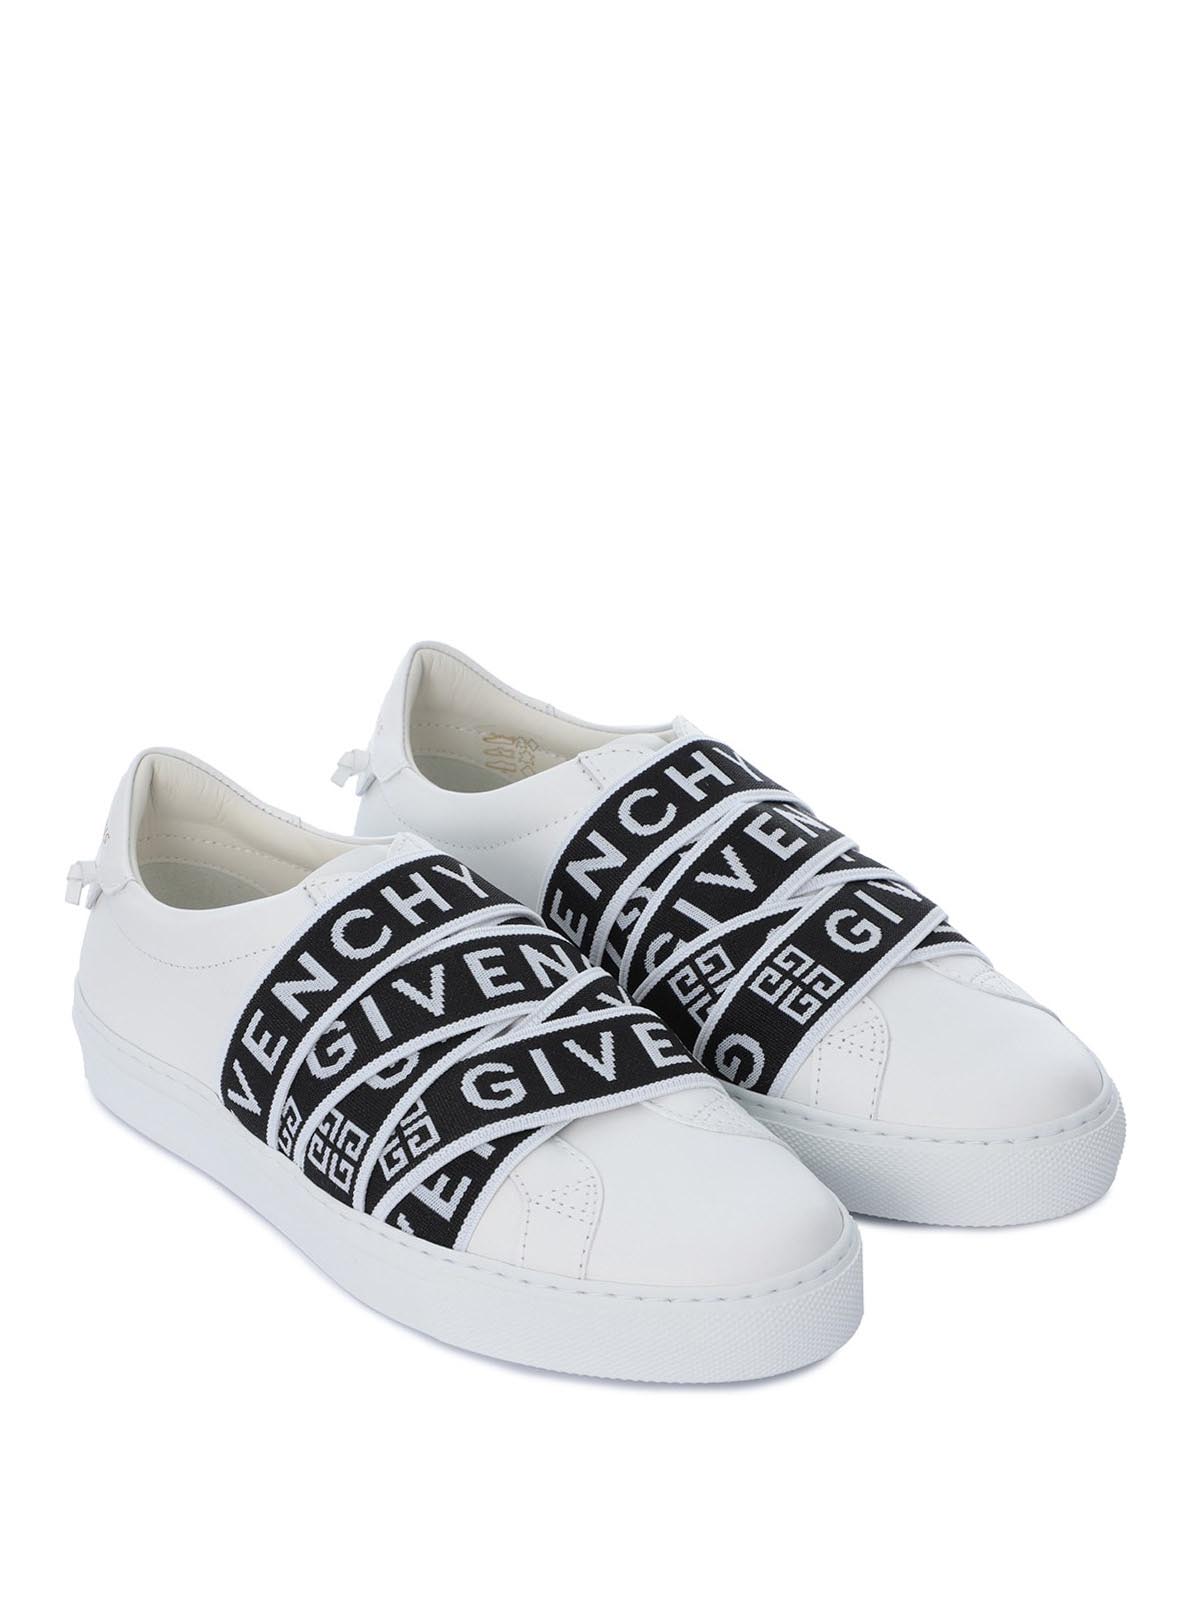 givenchy low top